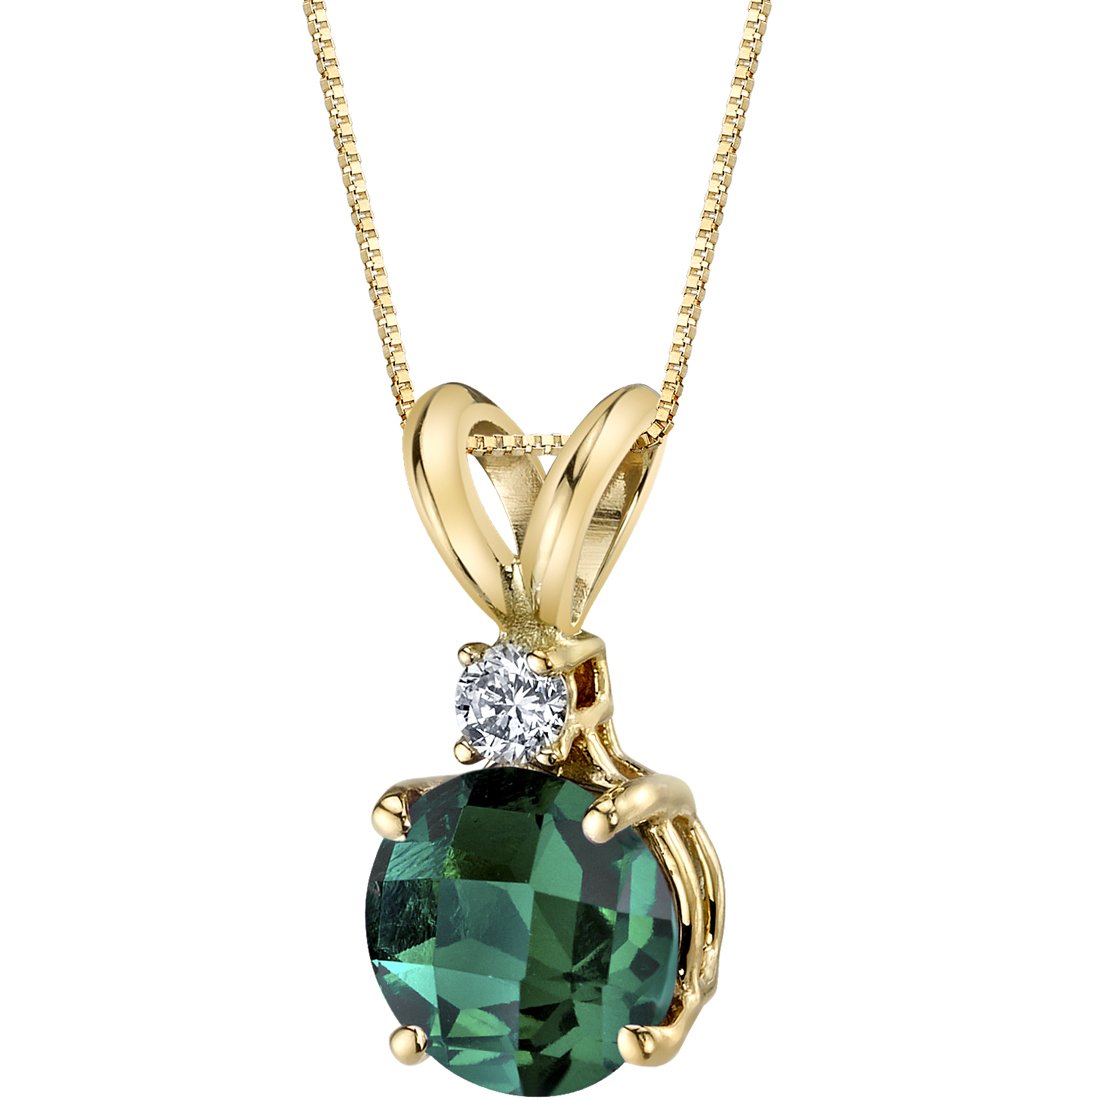 Peora Created Emerald with Genuine Diamond Pendant in 14K Yellow Gold, Elegant Solitaire, Round Shape, 6.50mm, 1 Carat total